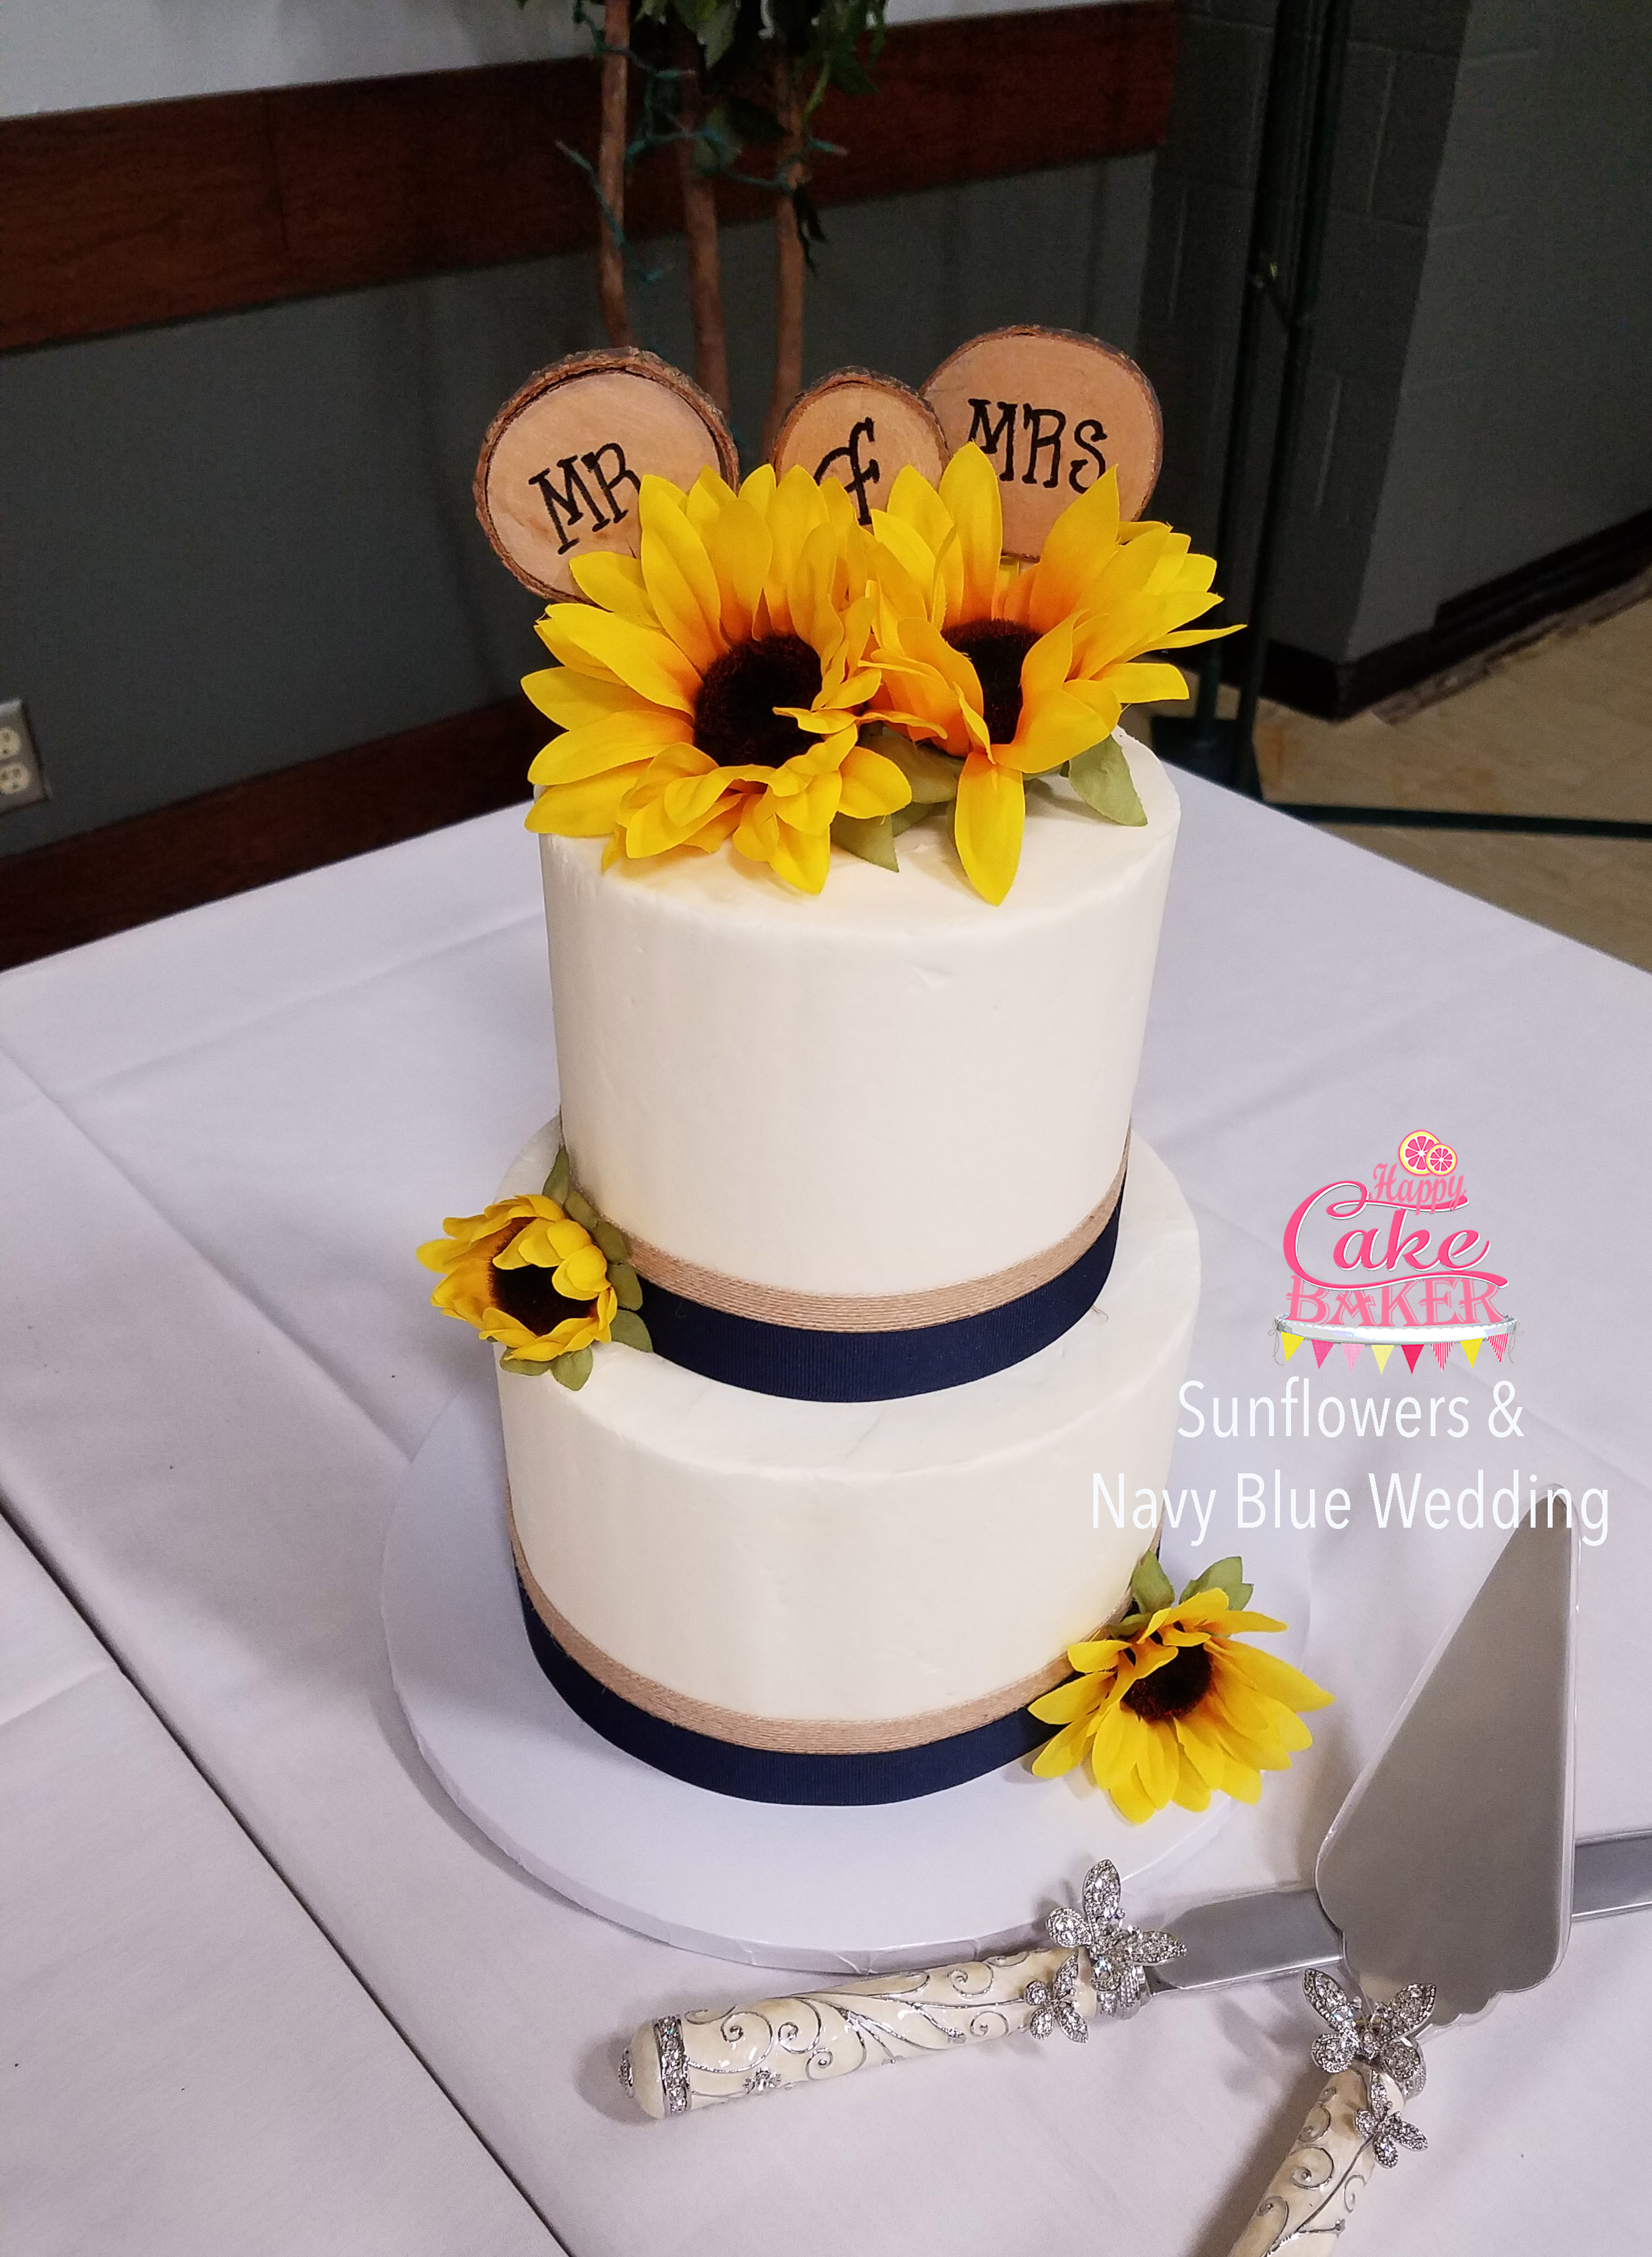 Happy Cake Baker – Creating memories one cake at a time!